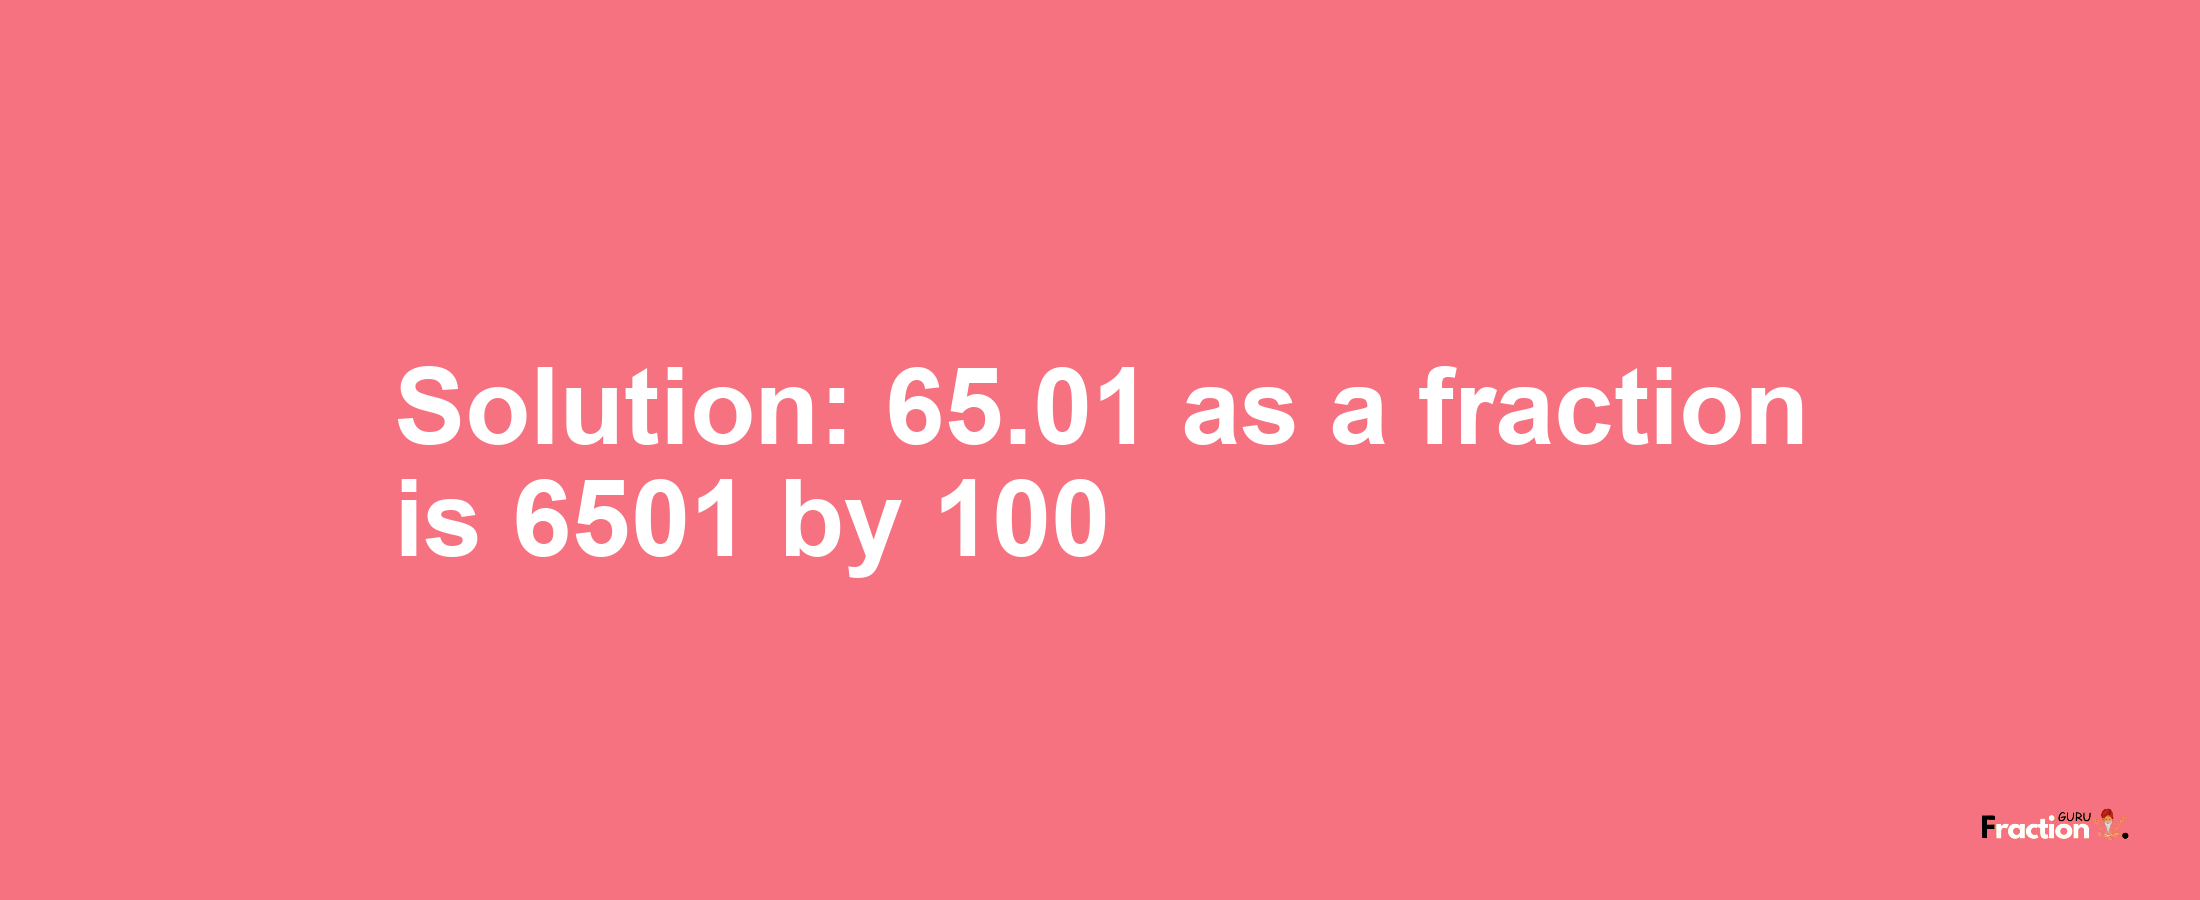 Solution:65.01 as a fraction is 6501/100